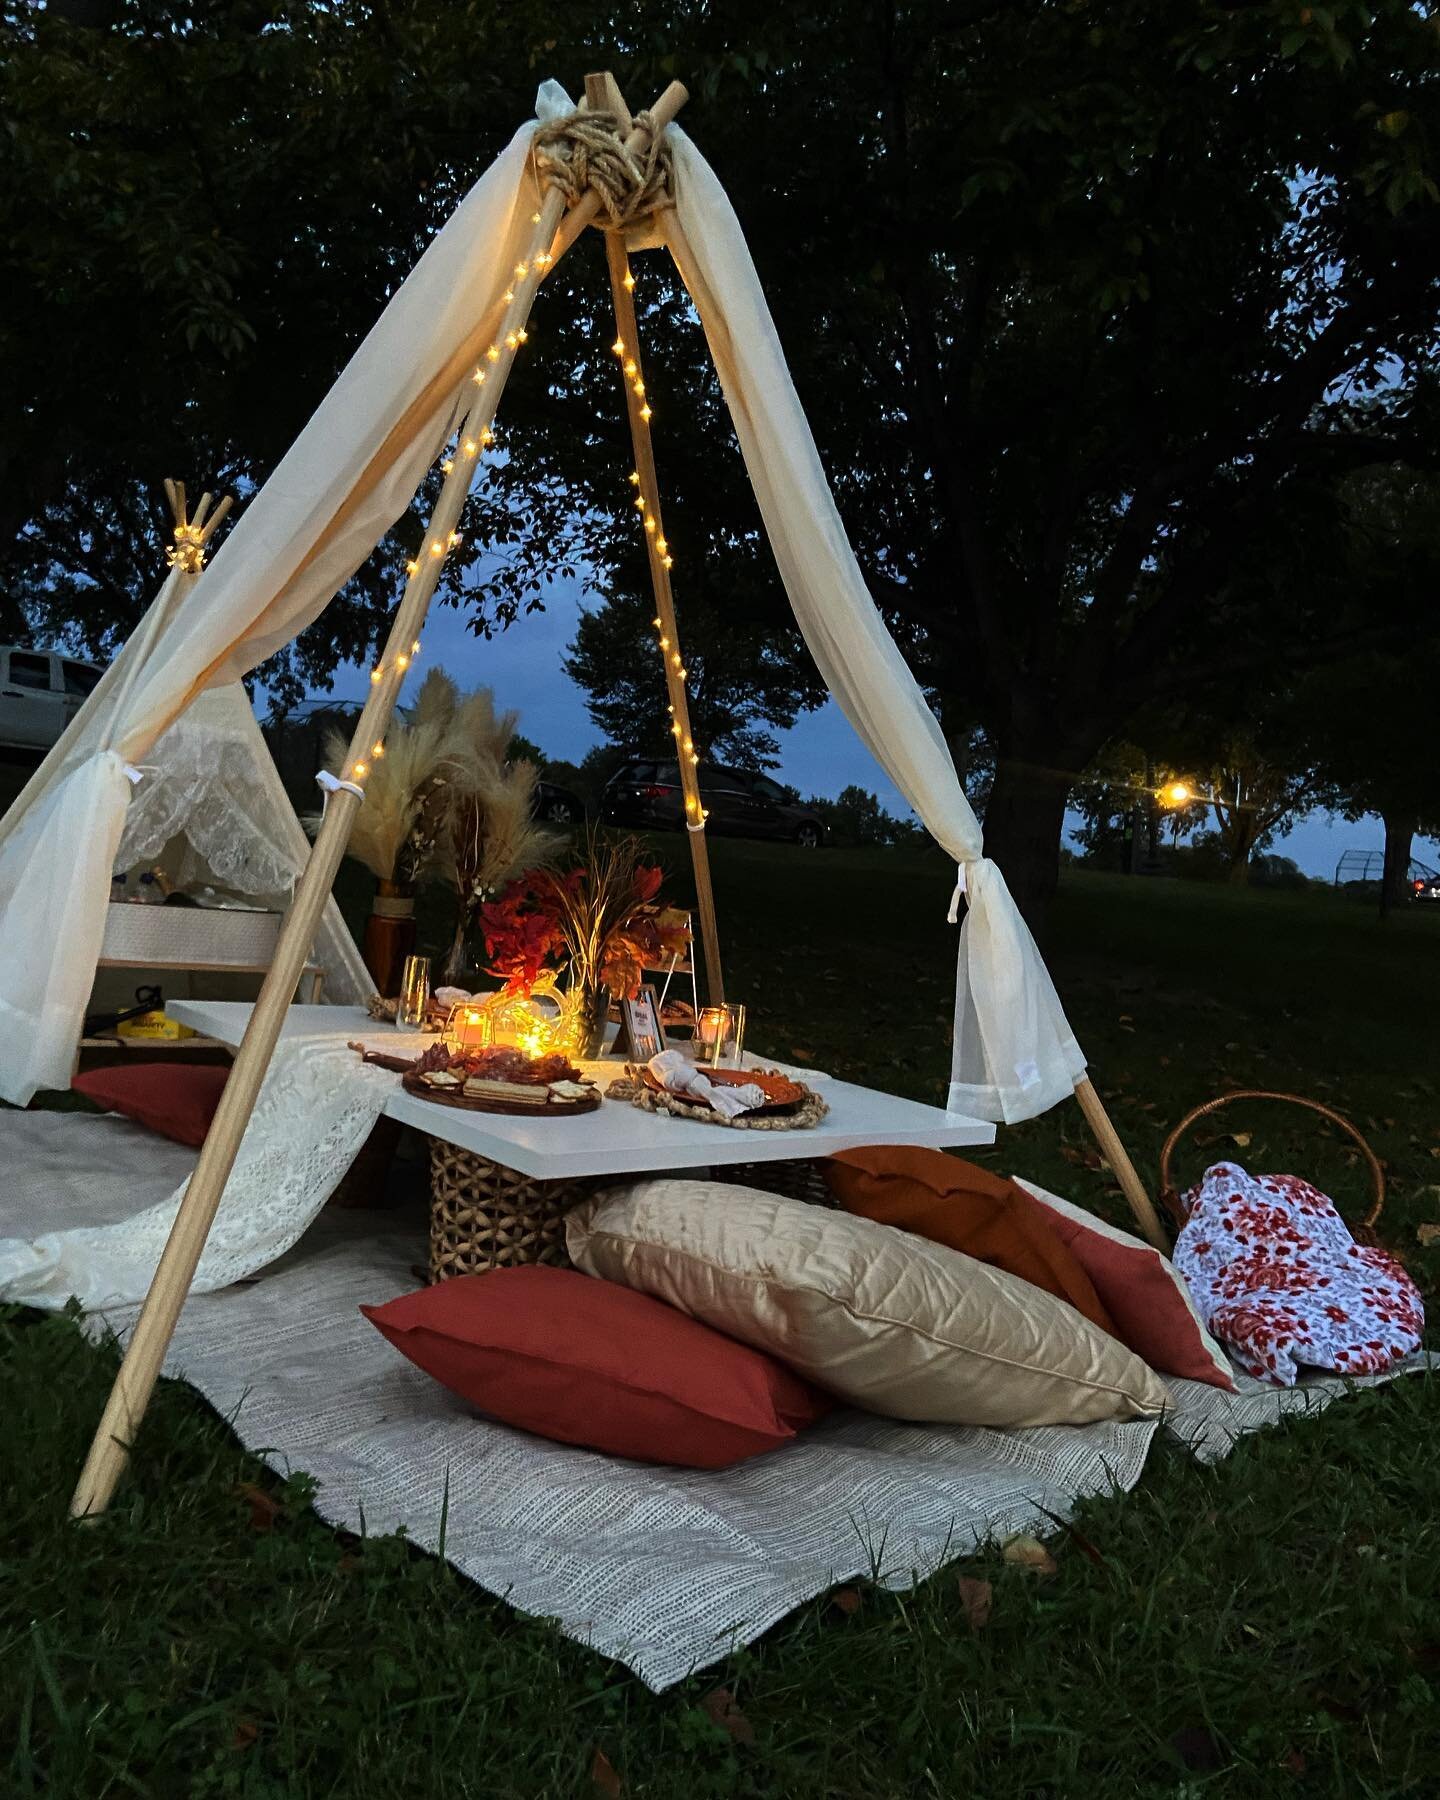 Swipe left to see a romantic candle light picnic under the stars ✨🤍 

Book us for your next date night, anniversary, or special occasion. 

#dmv #dmvpicnicsetup #luxurypicnic #dmvluxurypicnic #dmvdatenight #idealpicnic